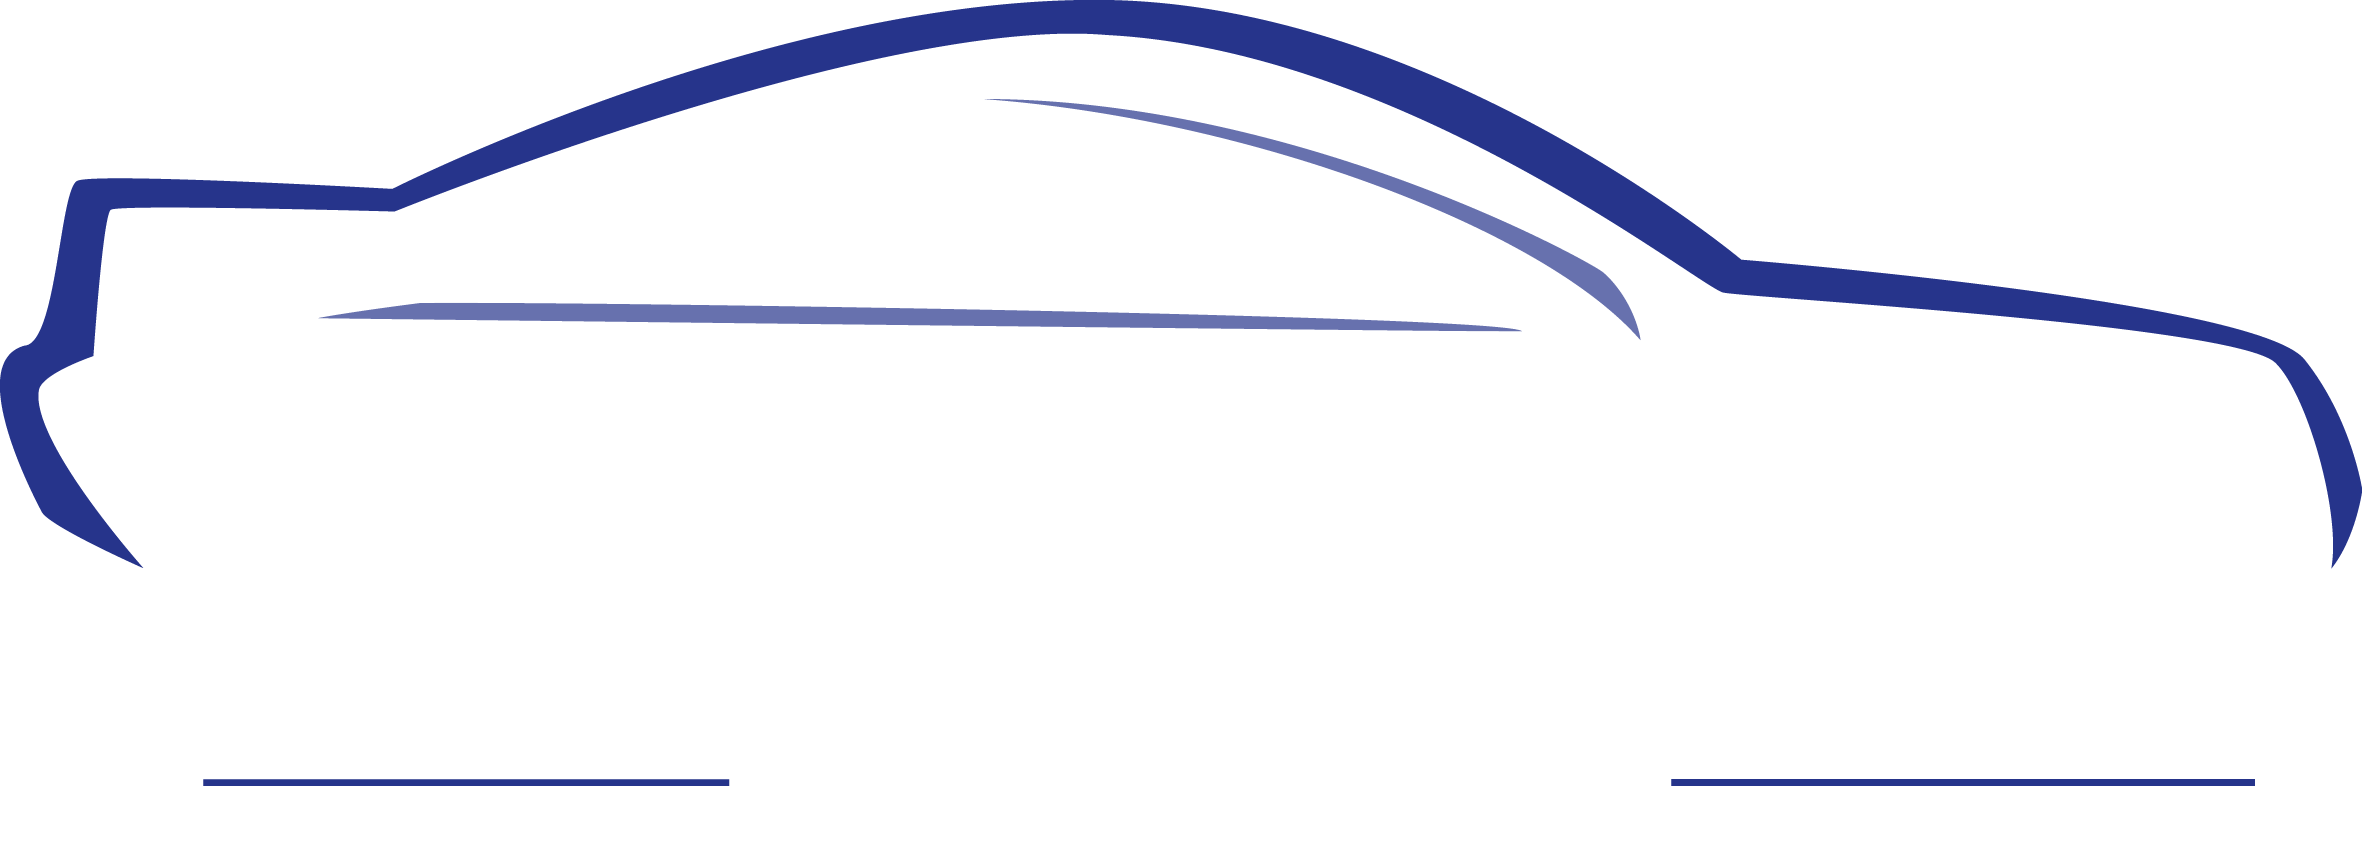 vote for car HD design png logo free downloads | naveengfx